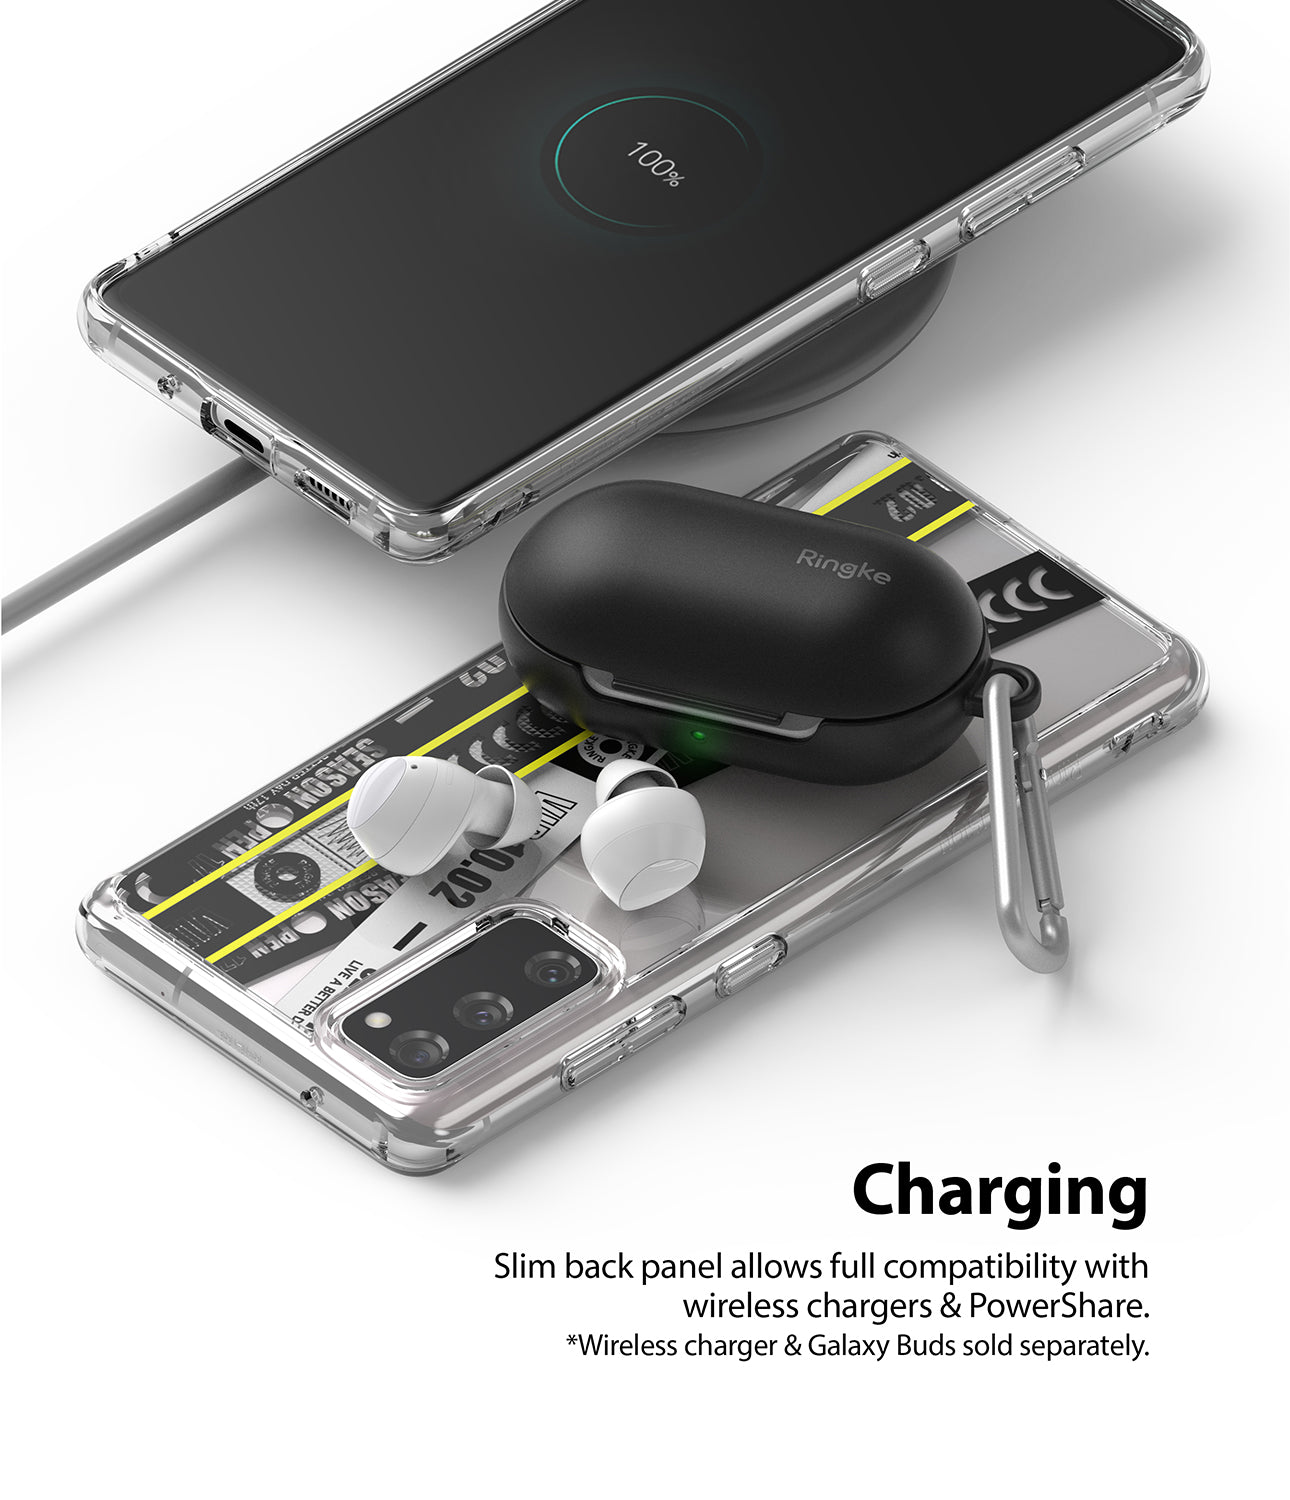 slim back panel allows full compatibility with wireless chargers and powershare